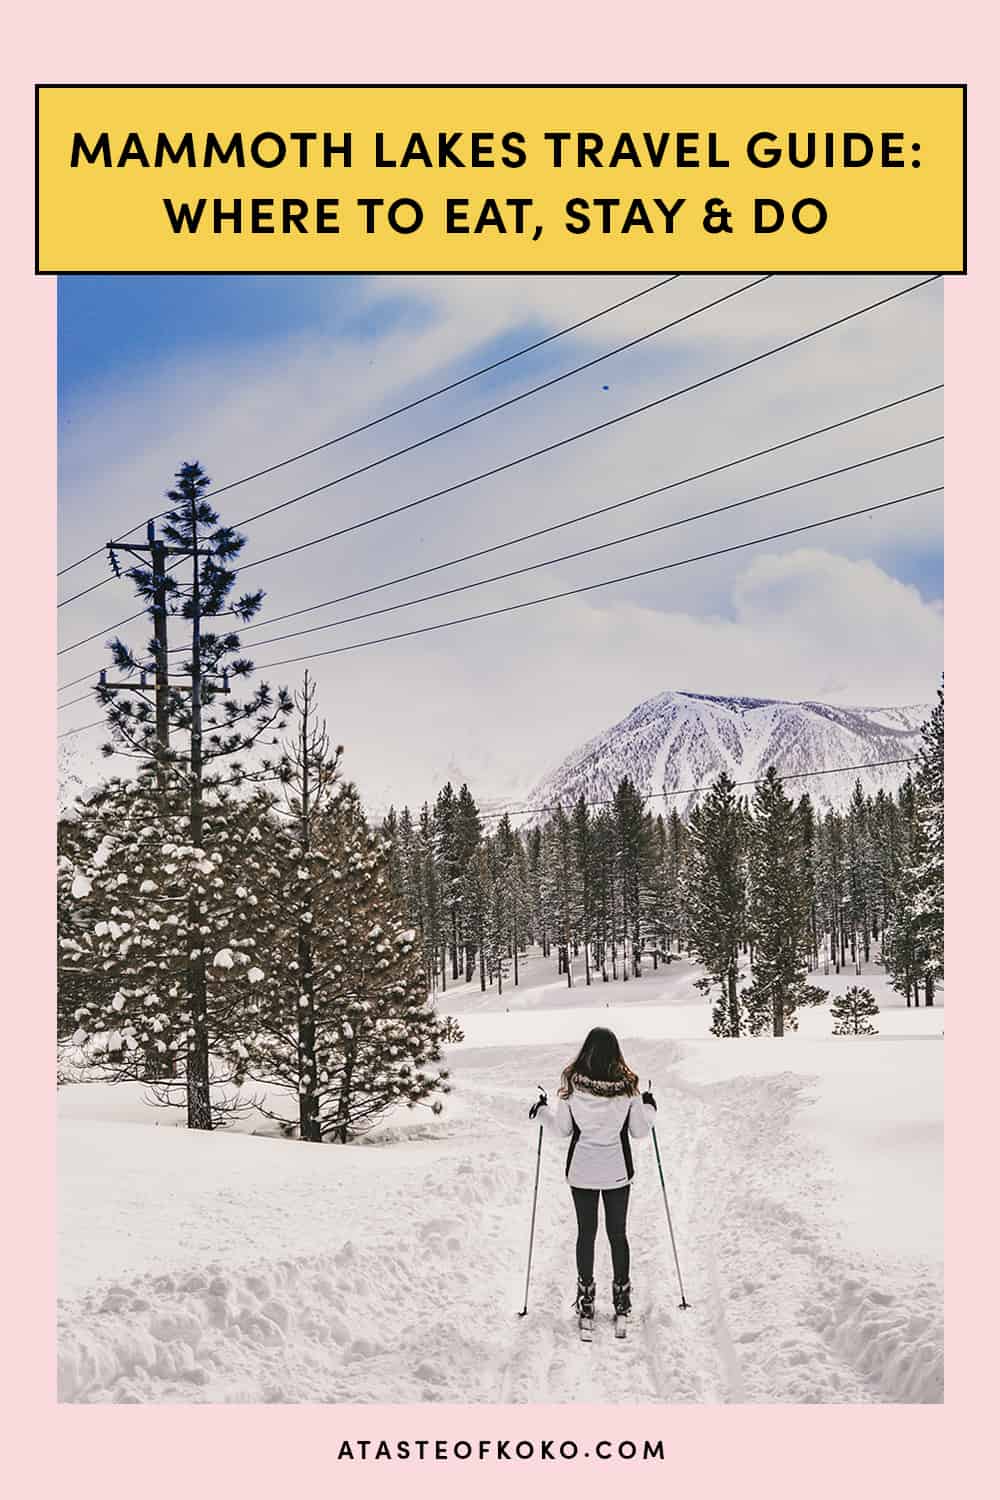 Mammoth Lakes Travel Guide - Where To Eat, Stay & Do